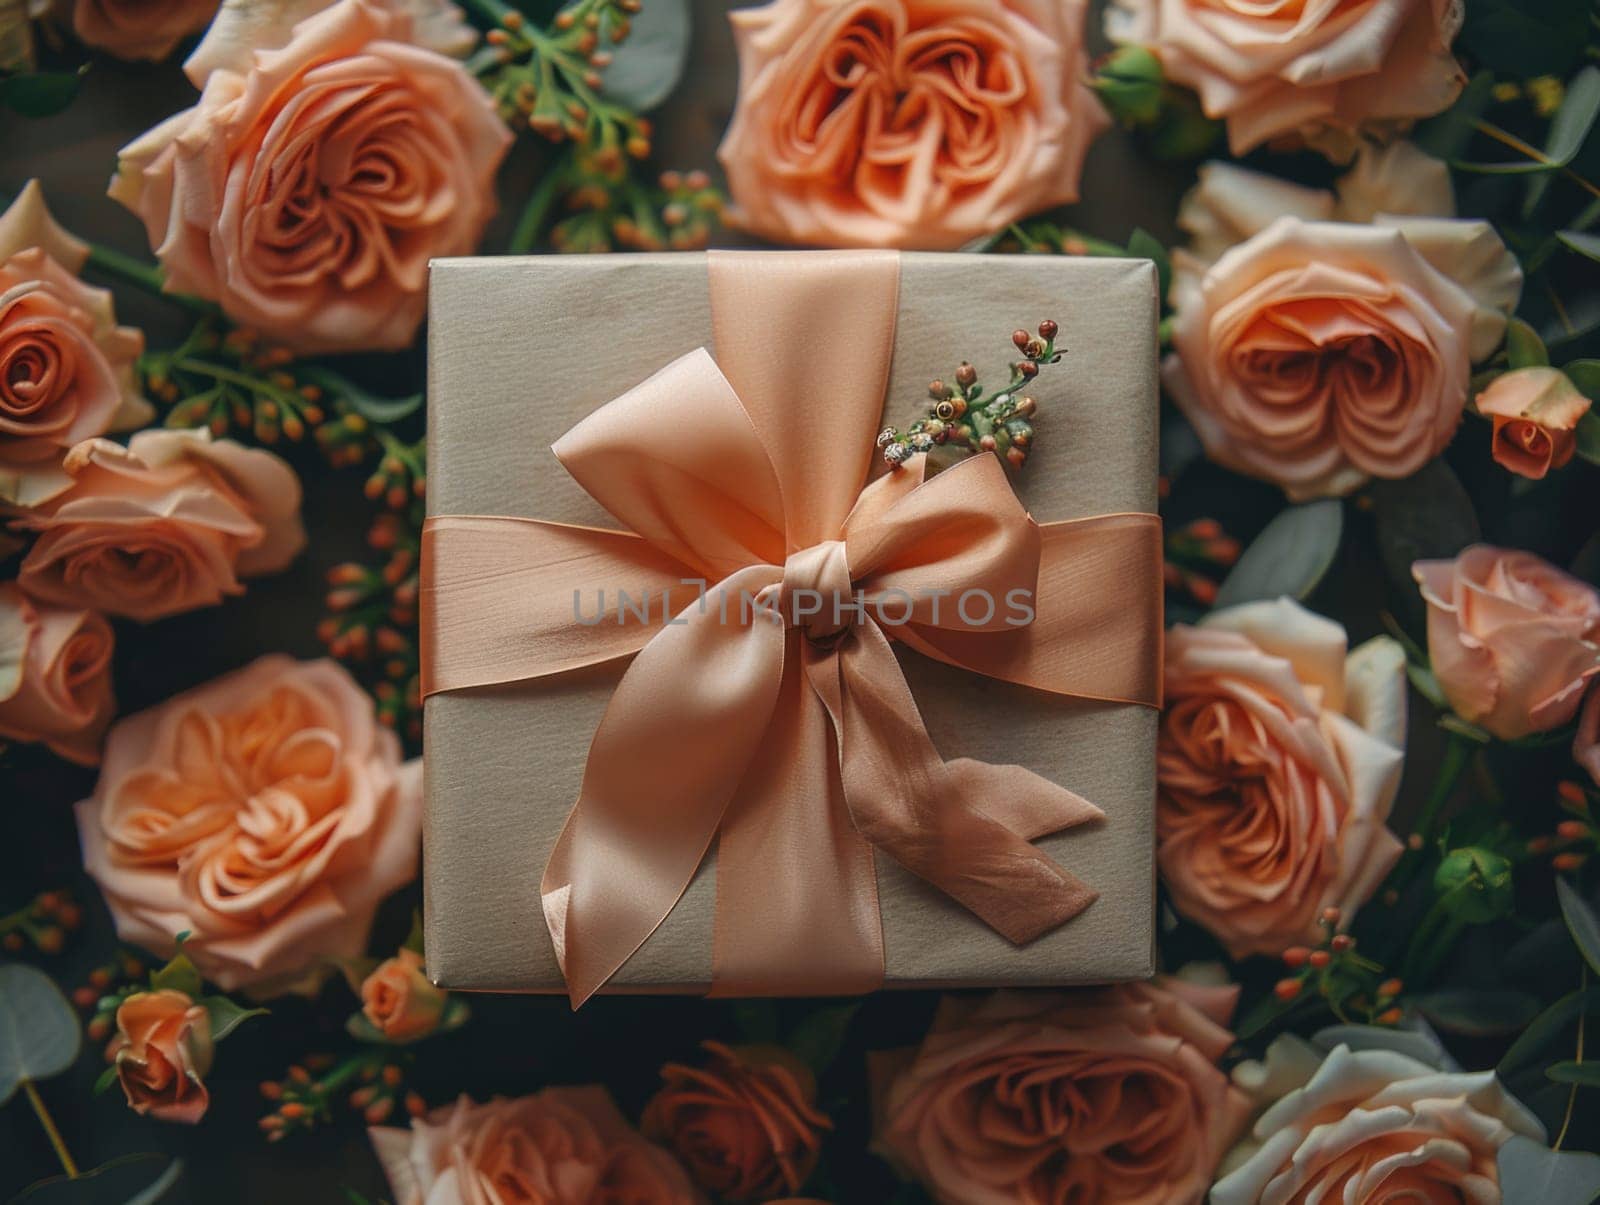 Pink Ribbon Gift Surrounded by Roses by but_photo